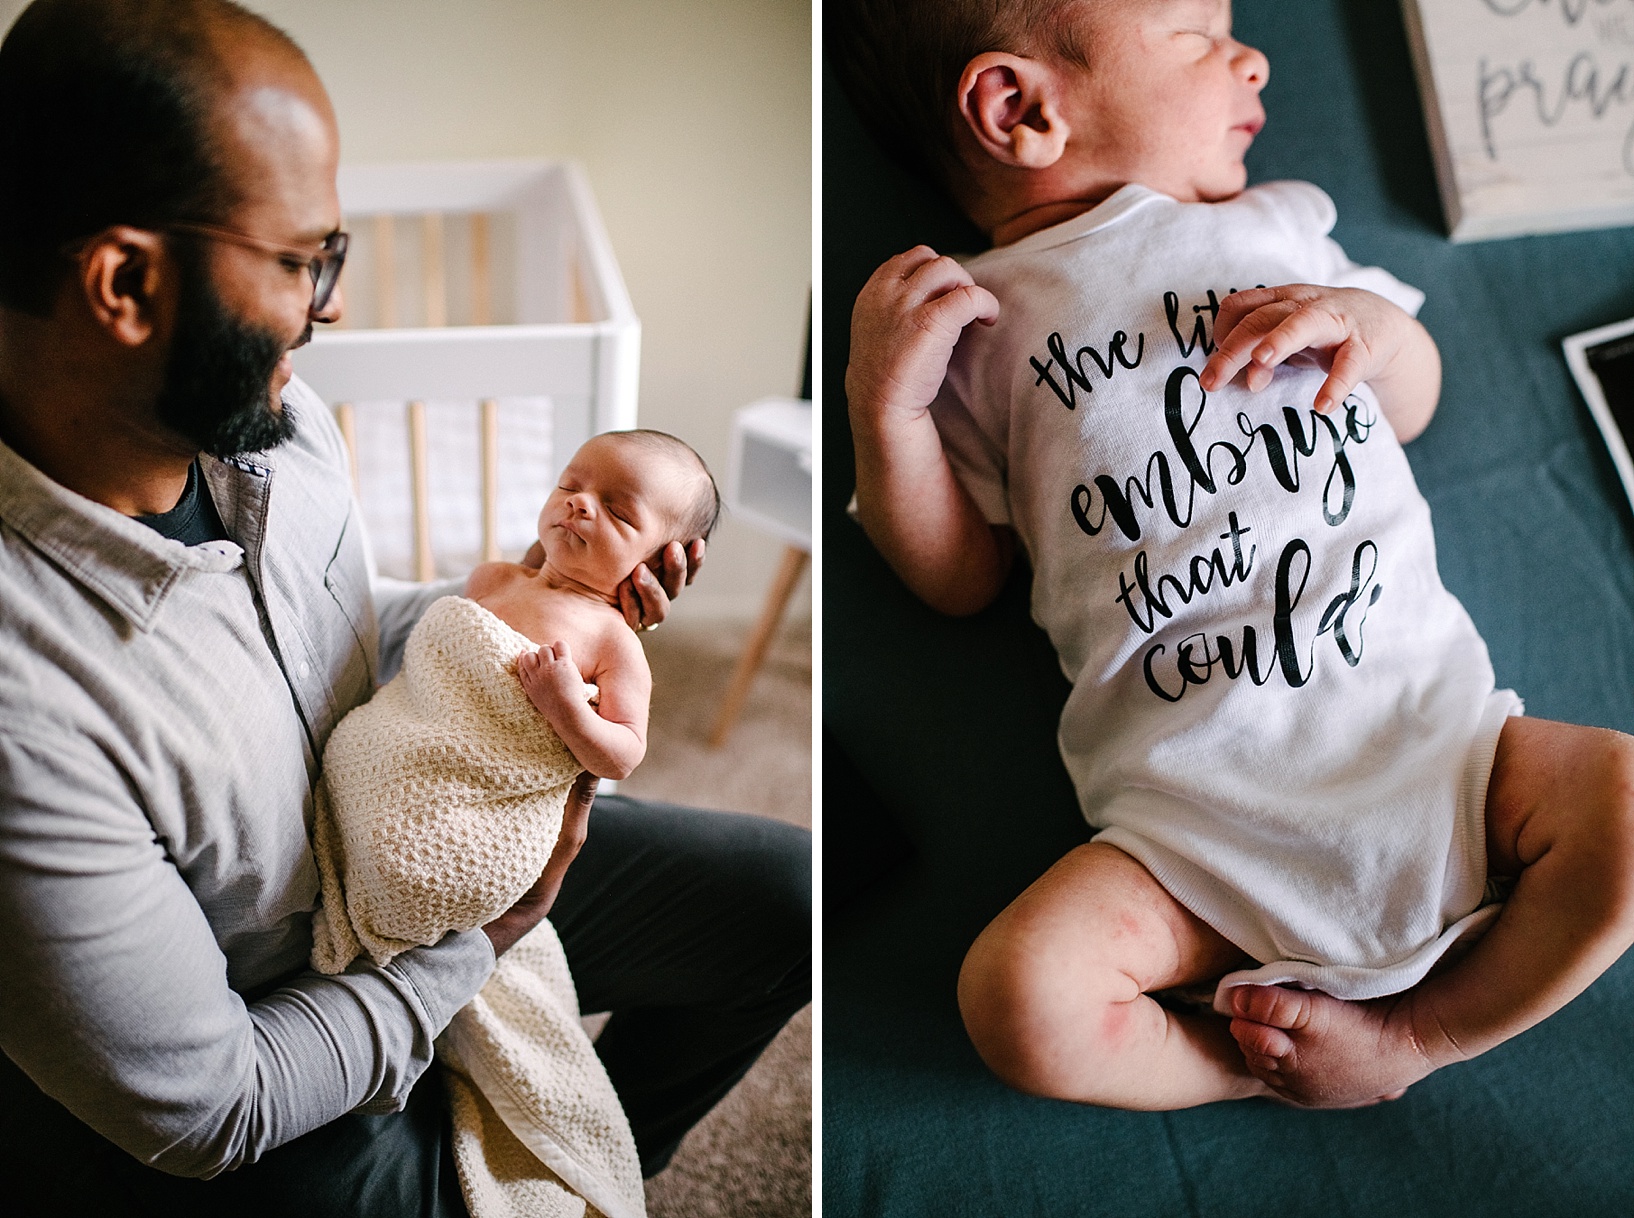 newborn baby wearing onesie that says the little embryo that could